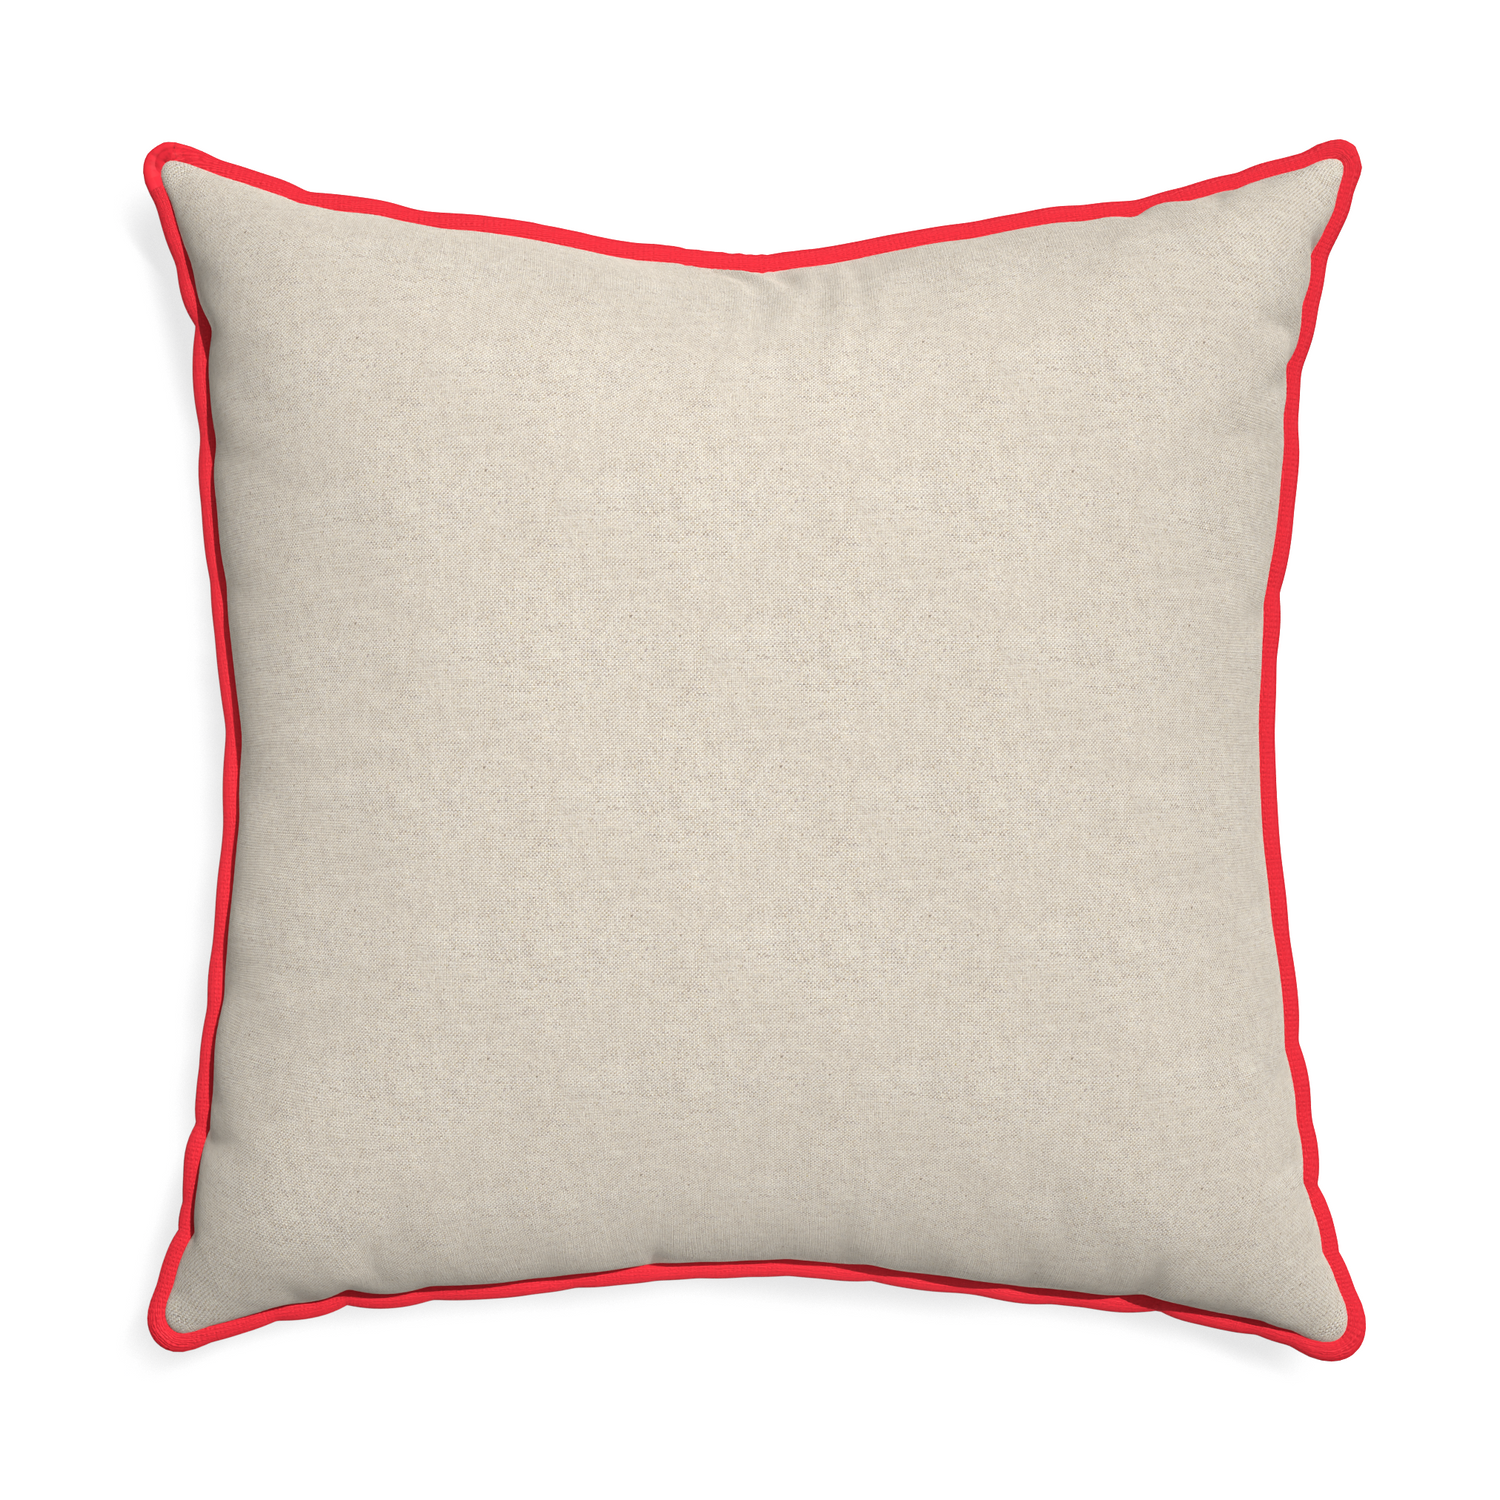 Euro-sham oat custom light brownpillow with cherry piping on white background